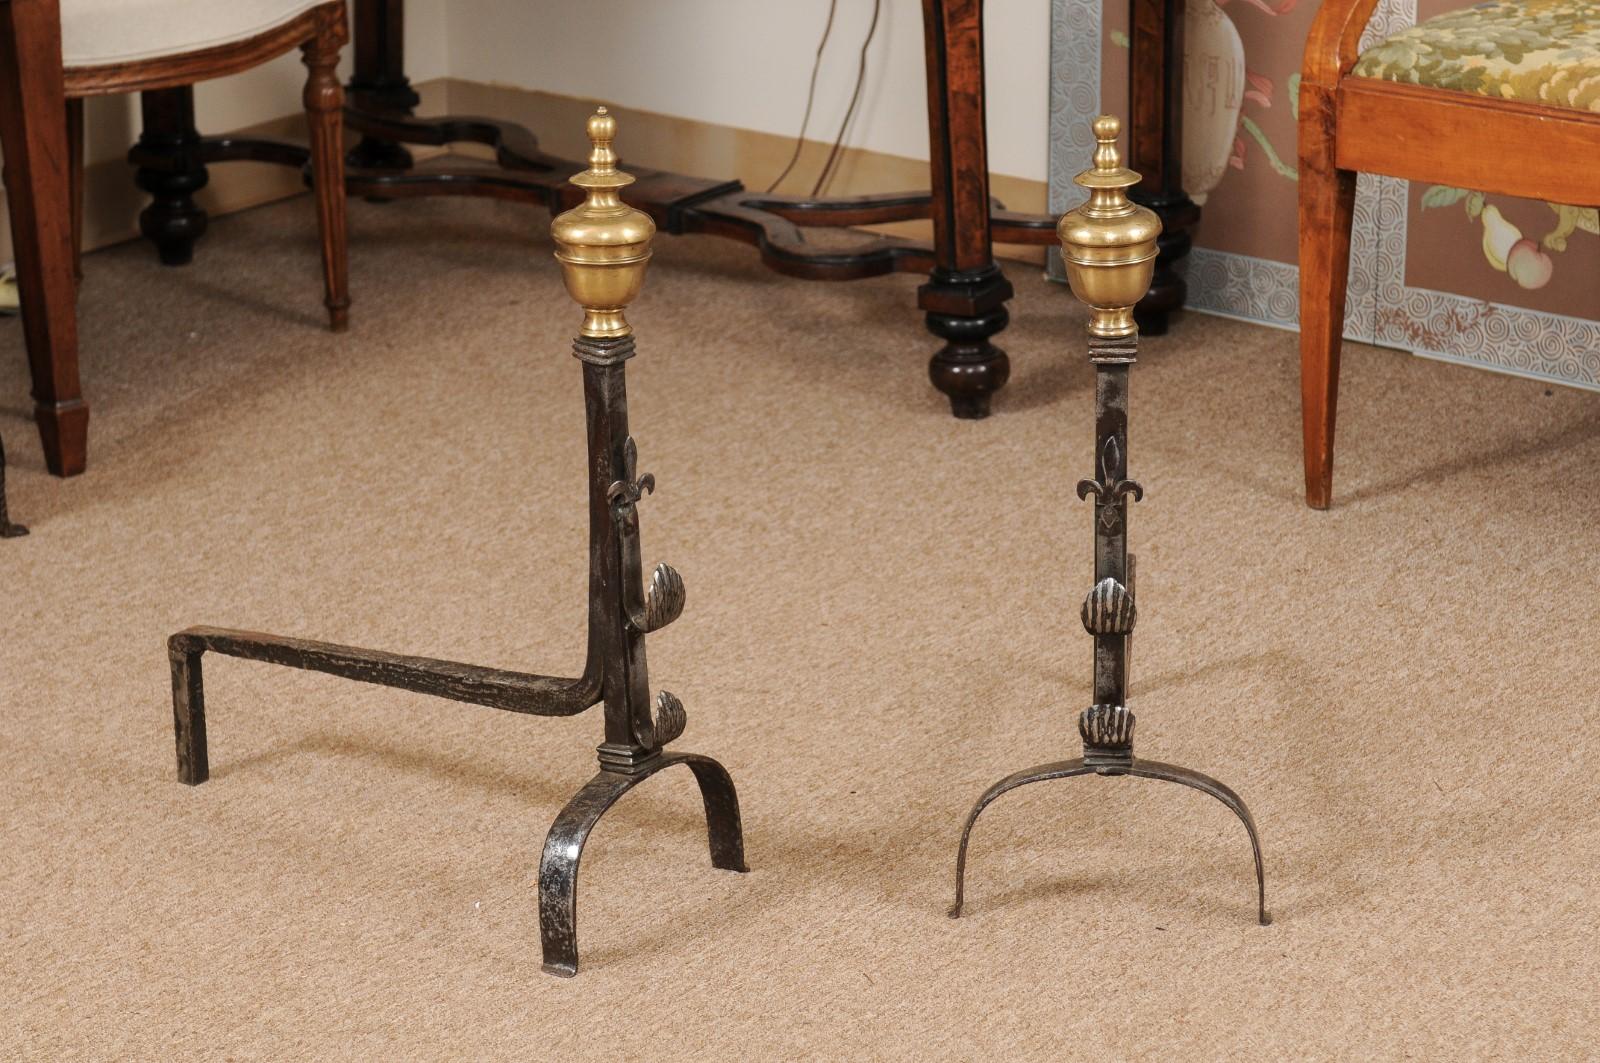 18th century French iron andirons featuring fleur de lis decoration and brass finials.